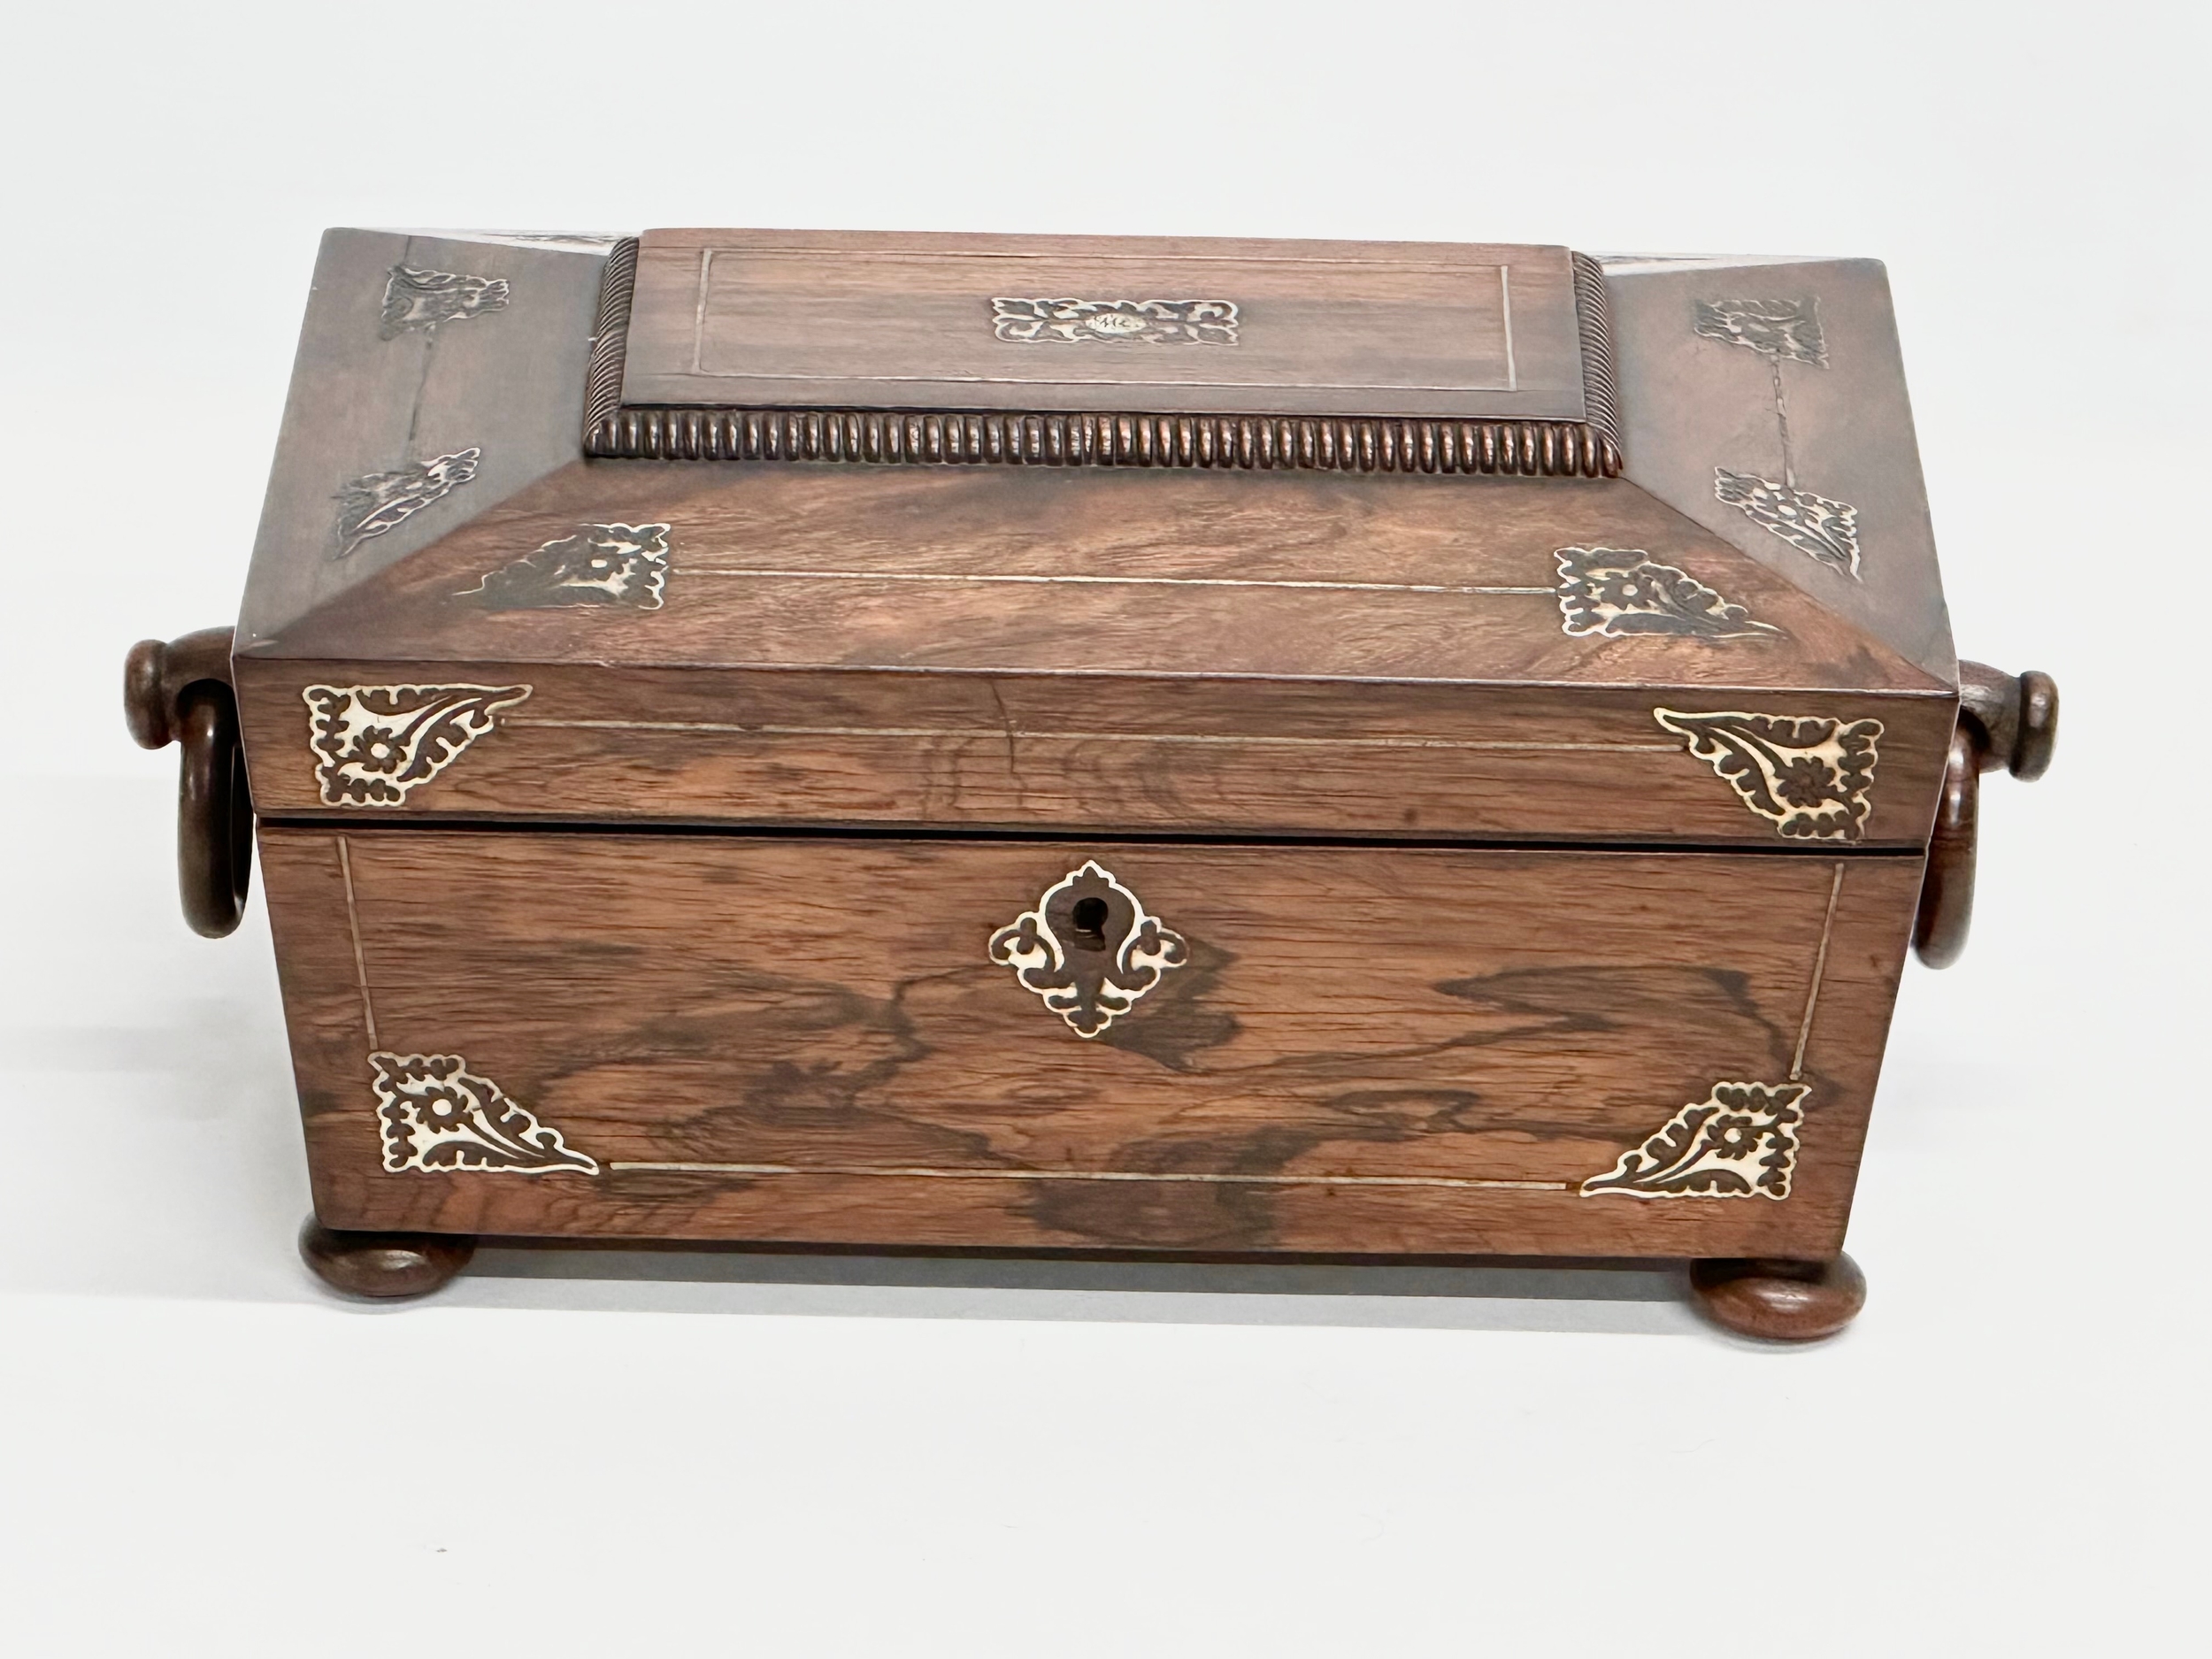 A Regency rosewood and Mother of Pearl sarcophagus shaped sewing box. Early 19th Century. Circa - Image 2 of 7